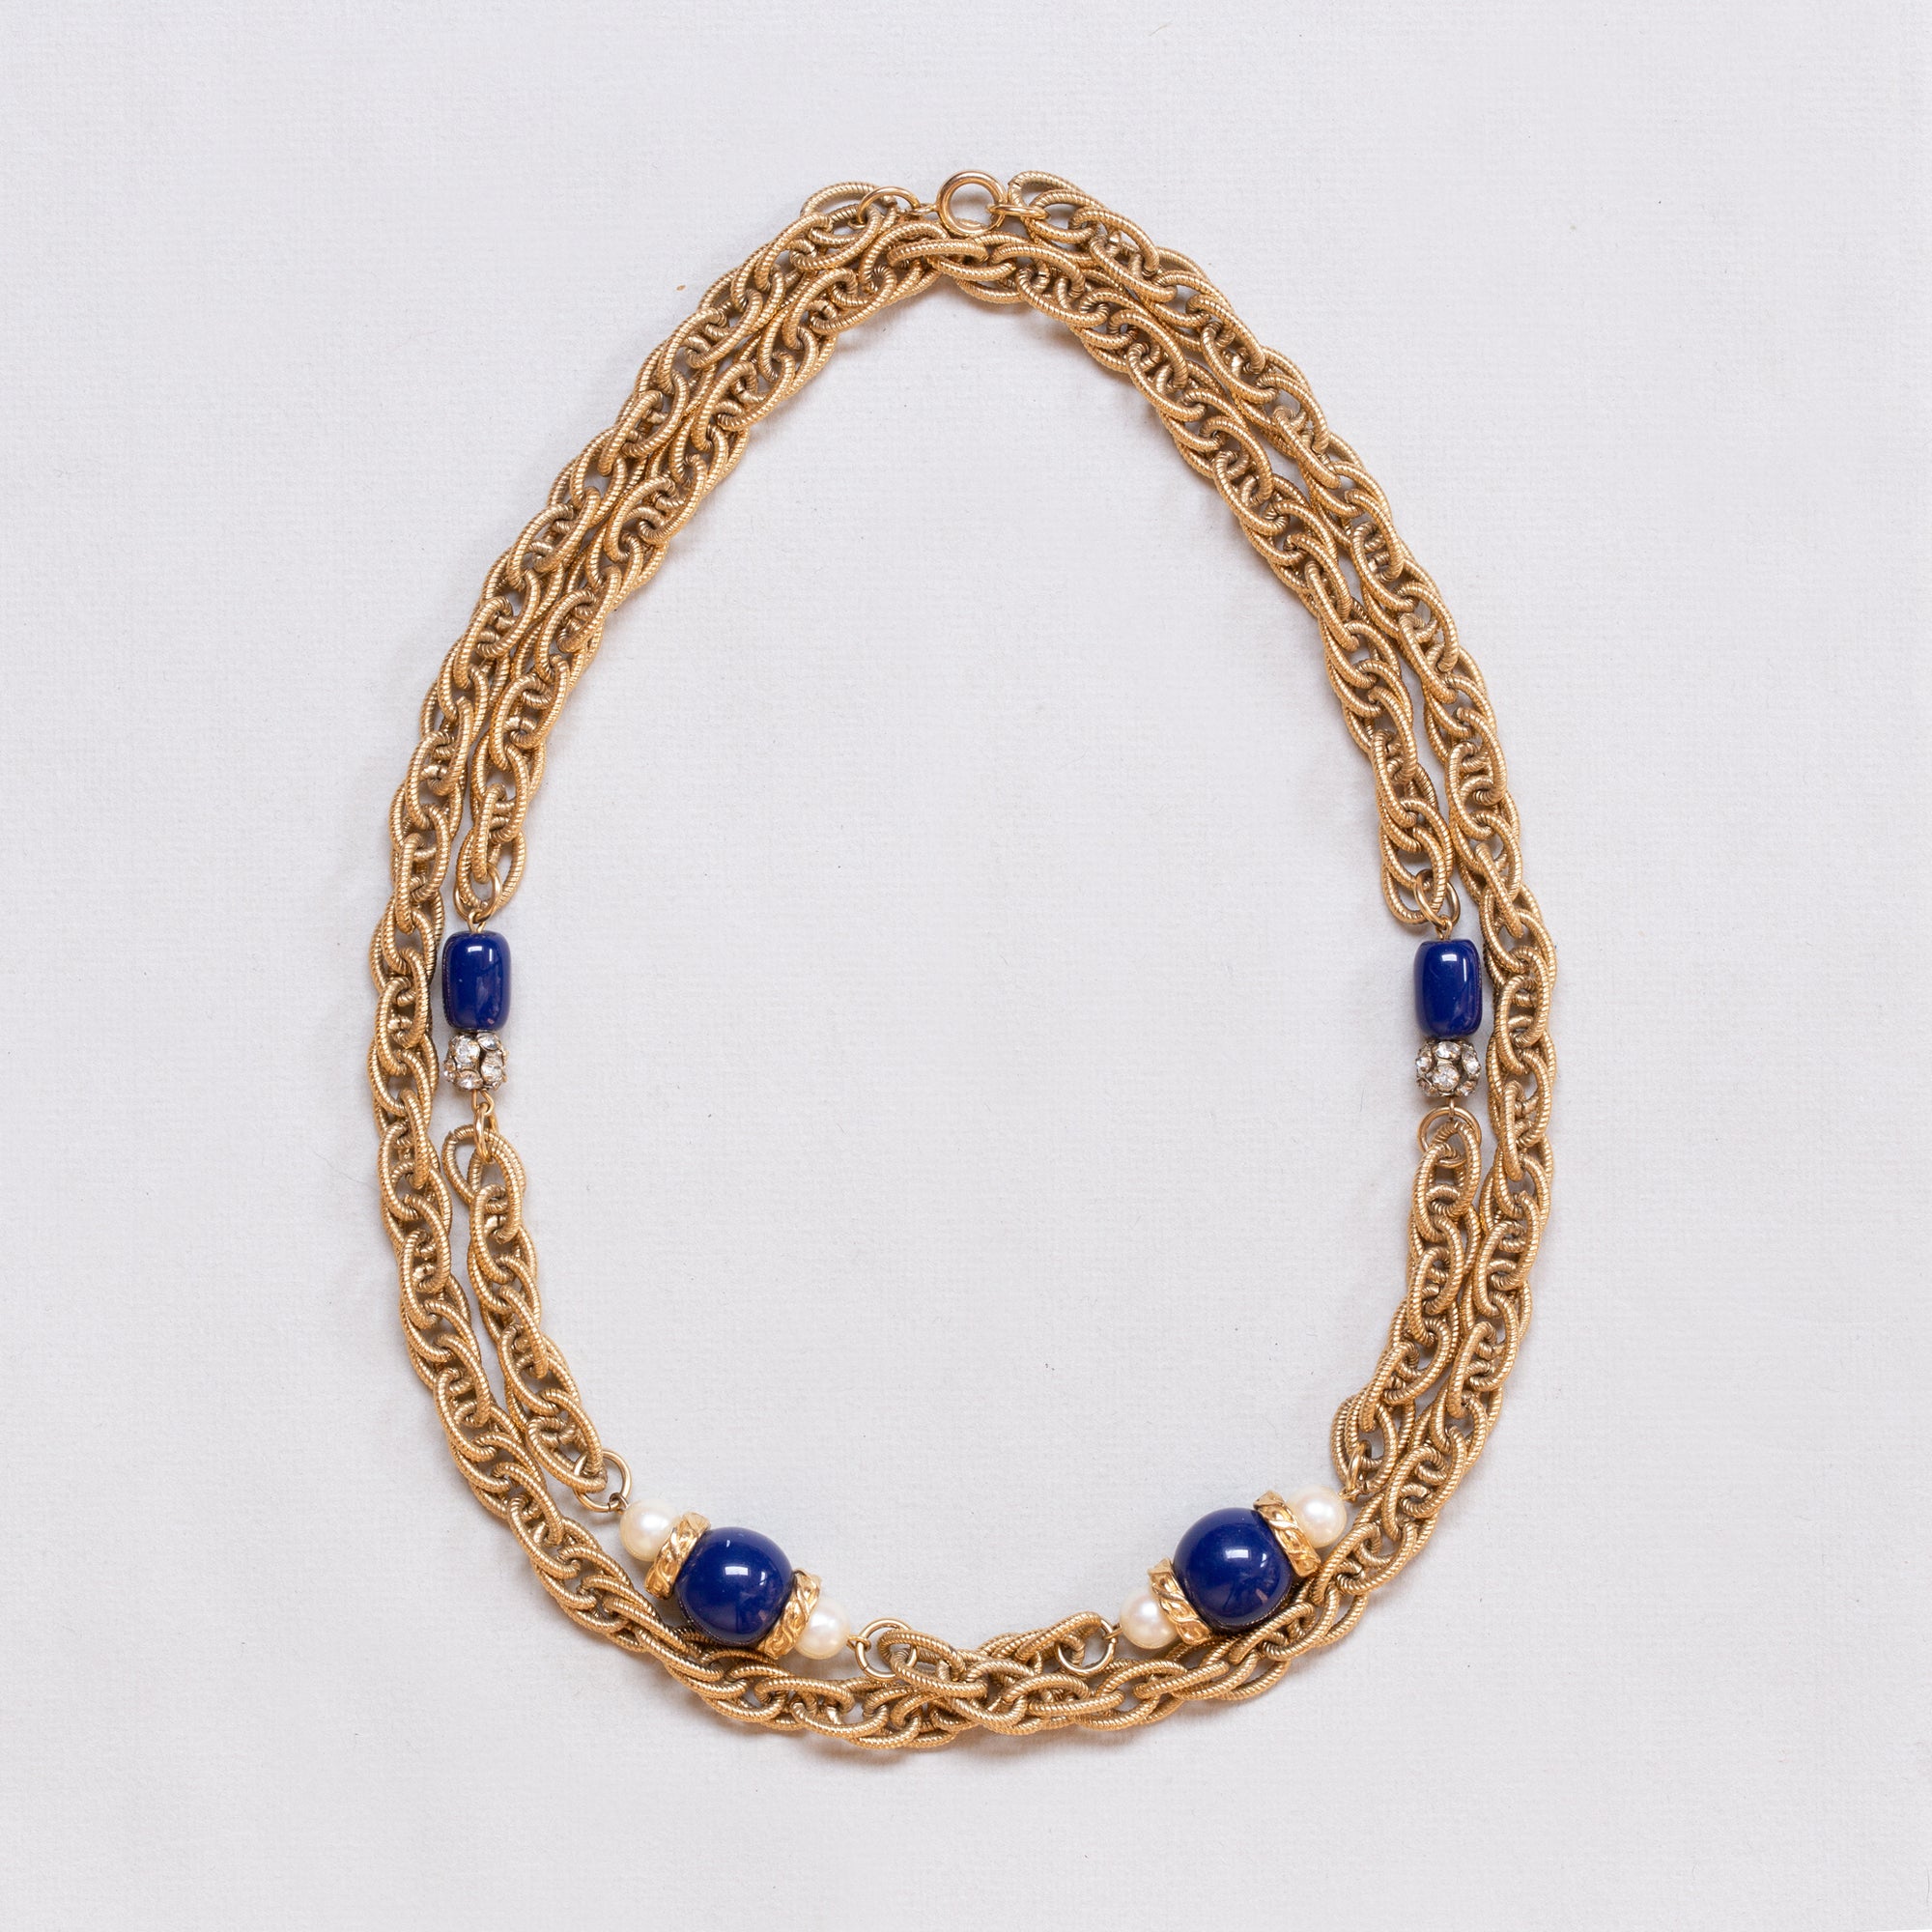 Vintage Givenchy Long Gold Chain Necklace with Faux Pearls and Blue Beads